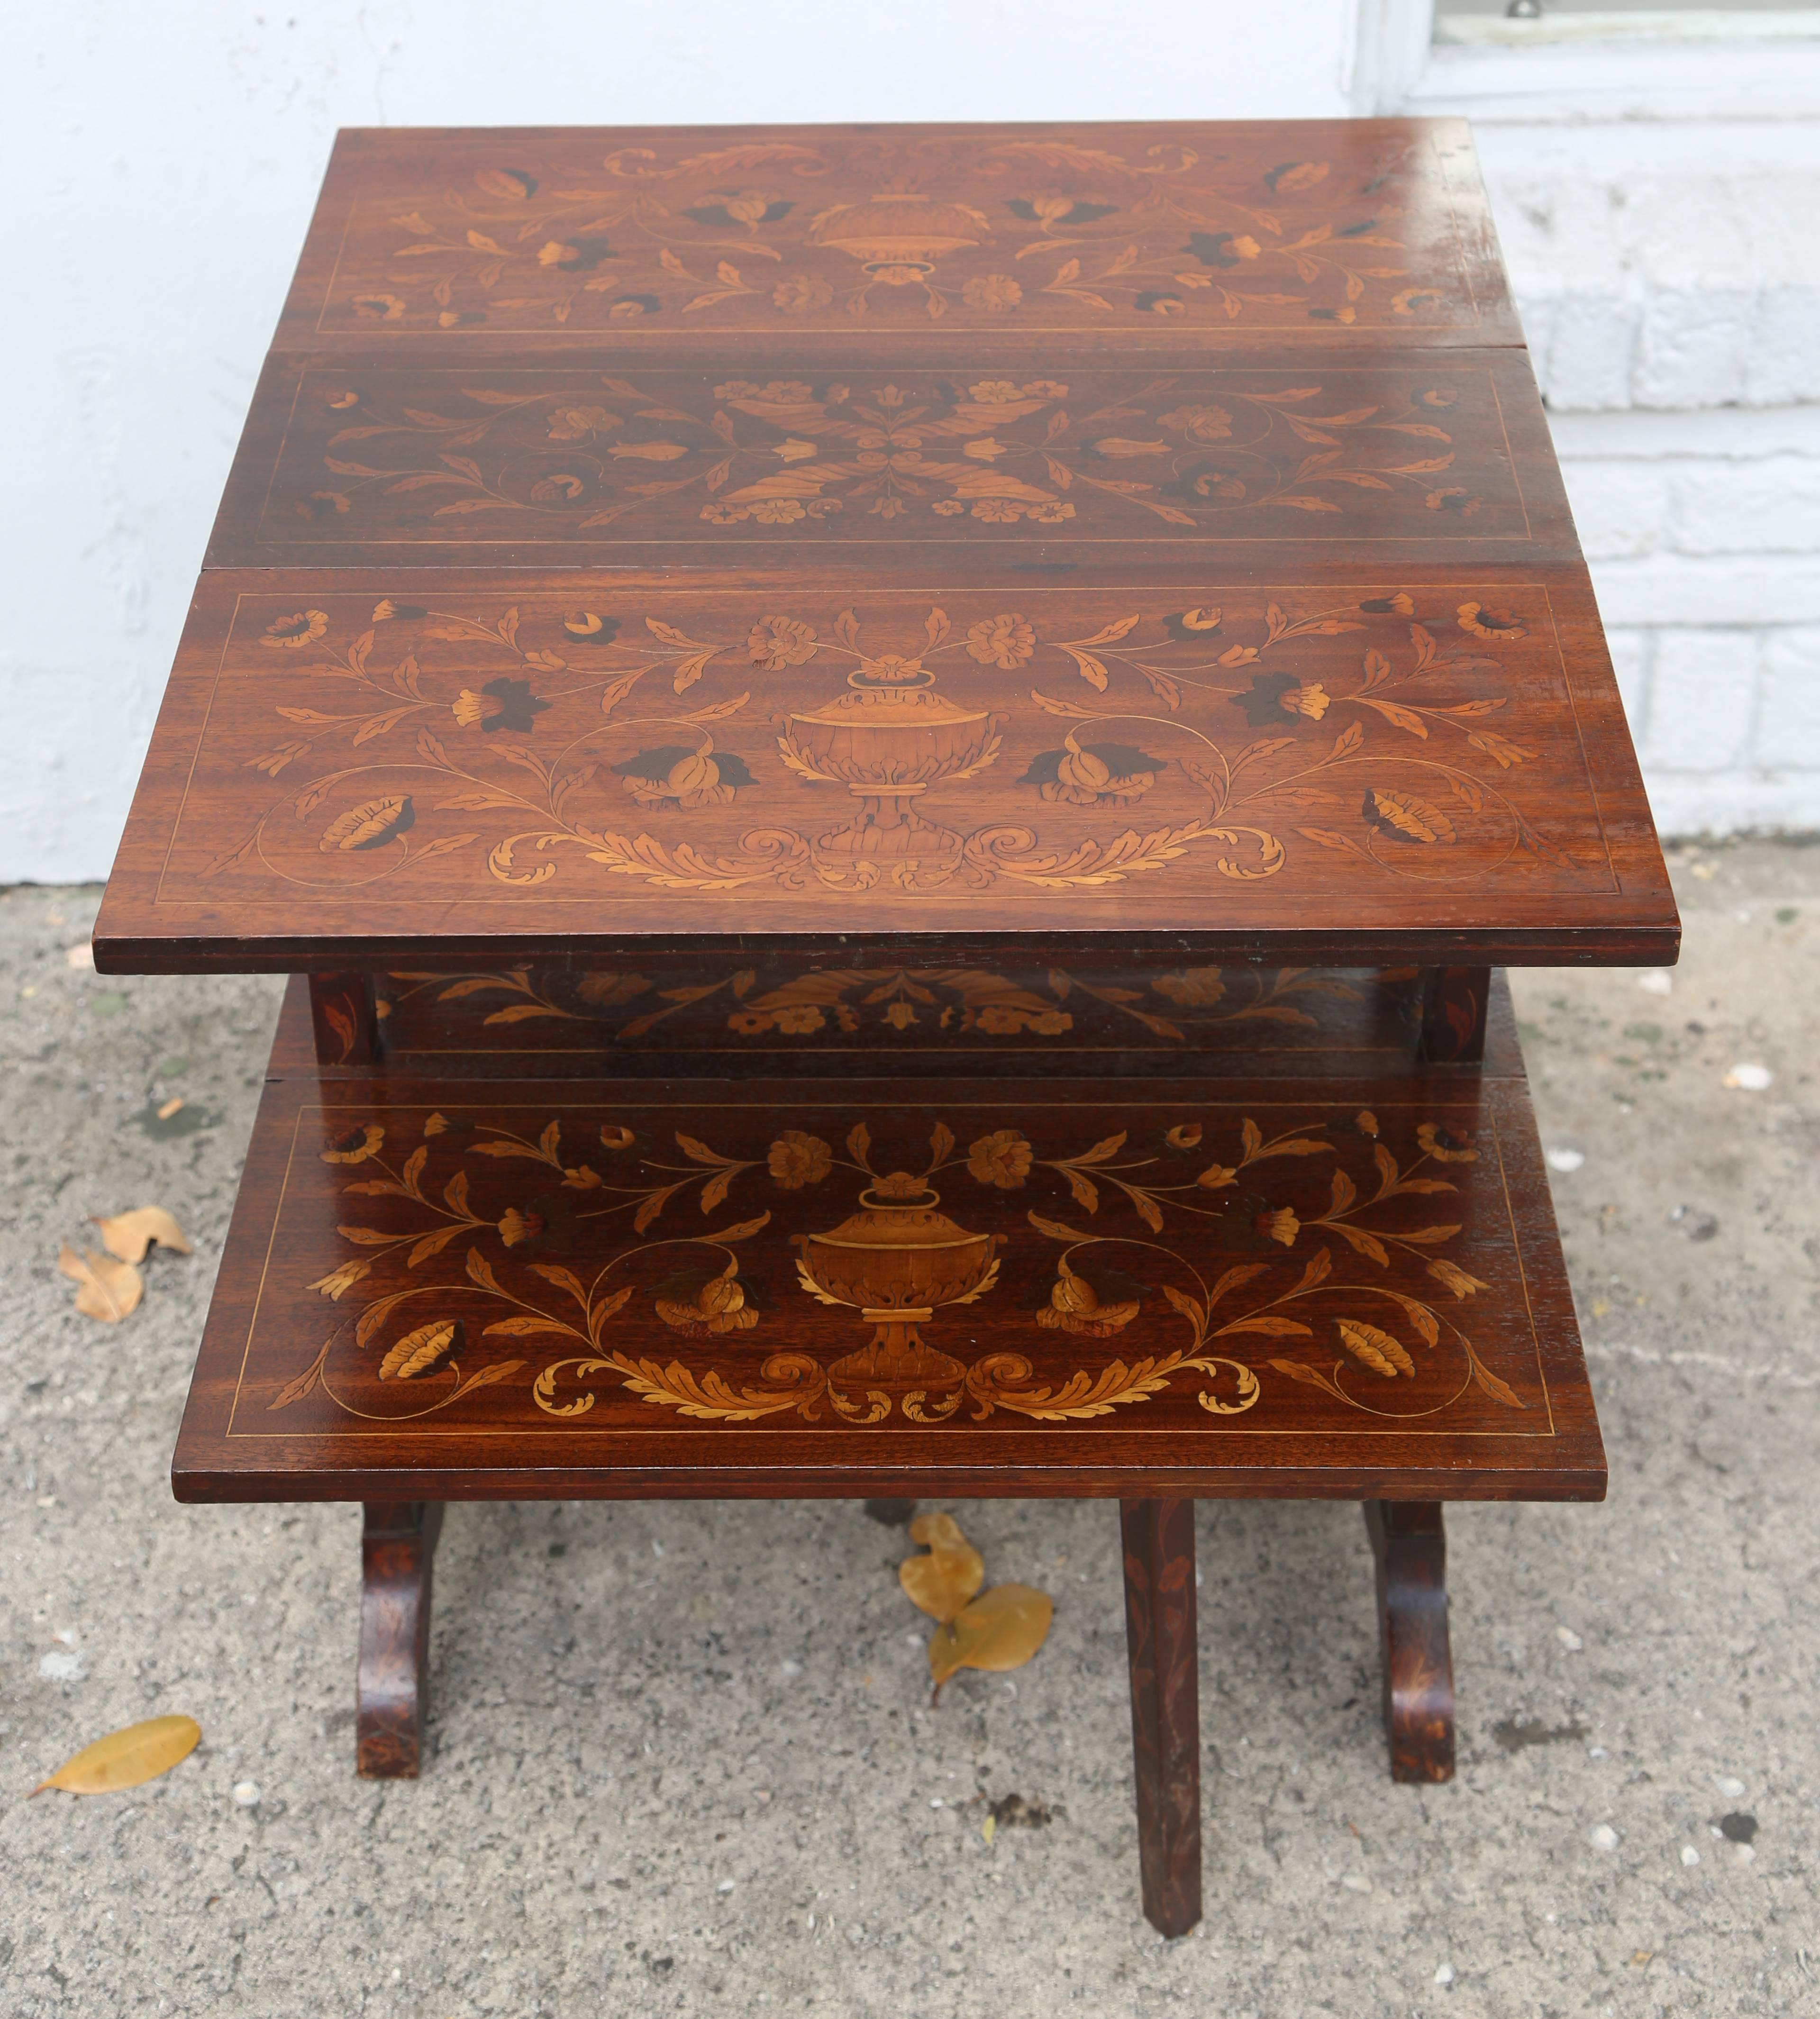 This is a very unusual and rare drop-leaf table, made in England, circa 1870.
Measures: 26 high x 26 wide x 33 long with the leafs up and 10 inches across with the leafs down. Two drop leafs to each side, then folds away to a small table.
 